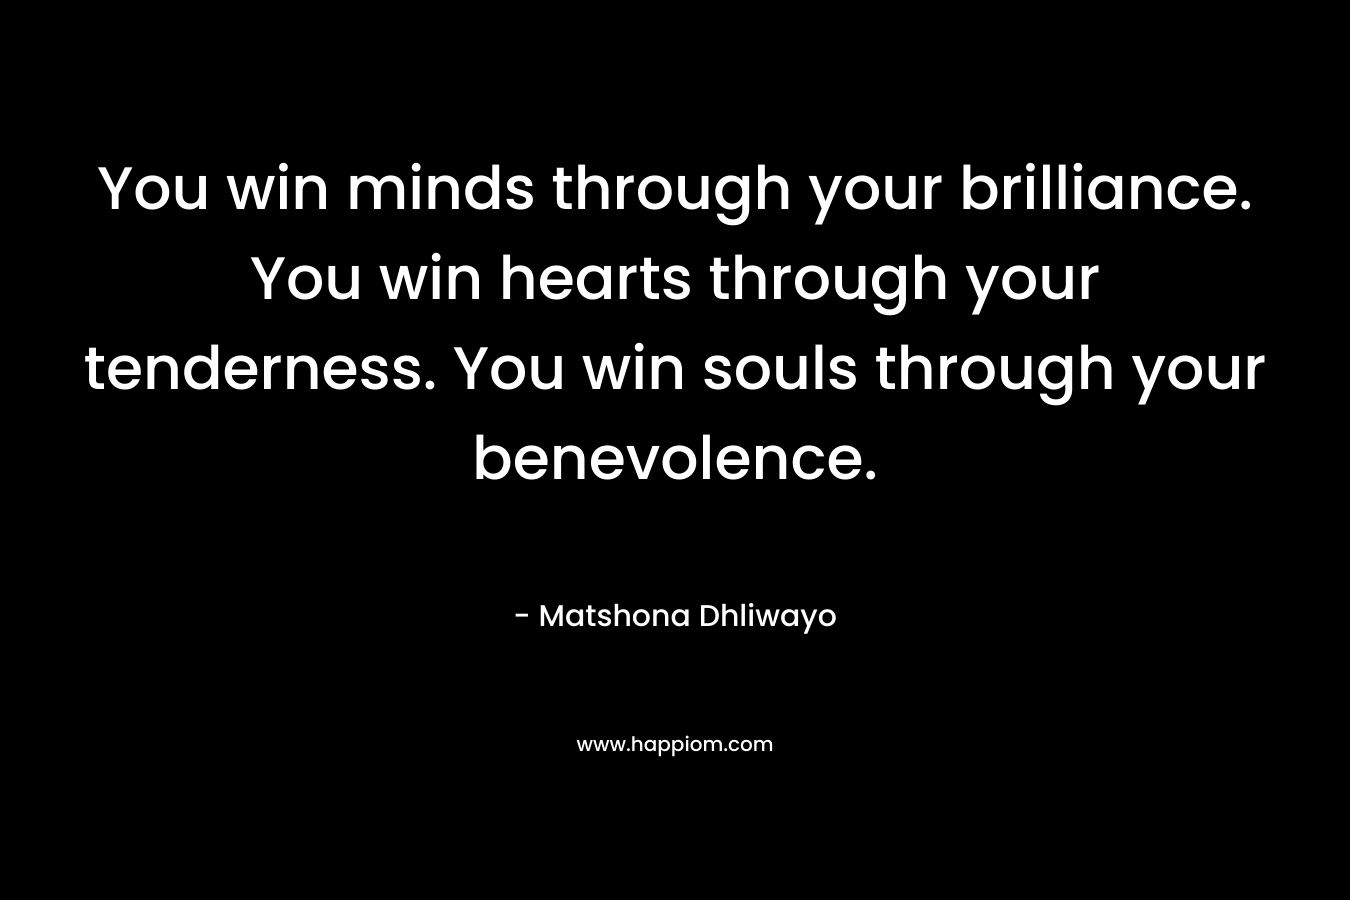 You win minds through your brilliance. You win hearts through your tenderness. You win souls through your benevolence.